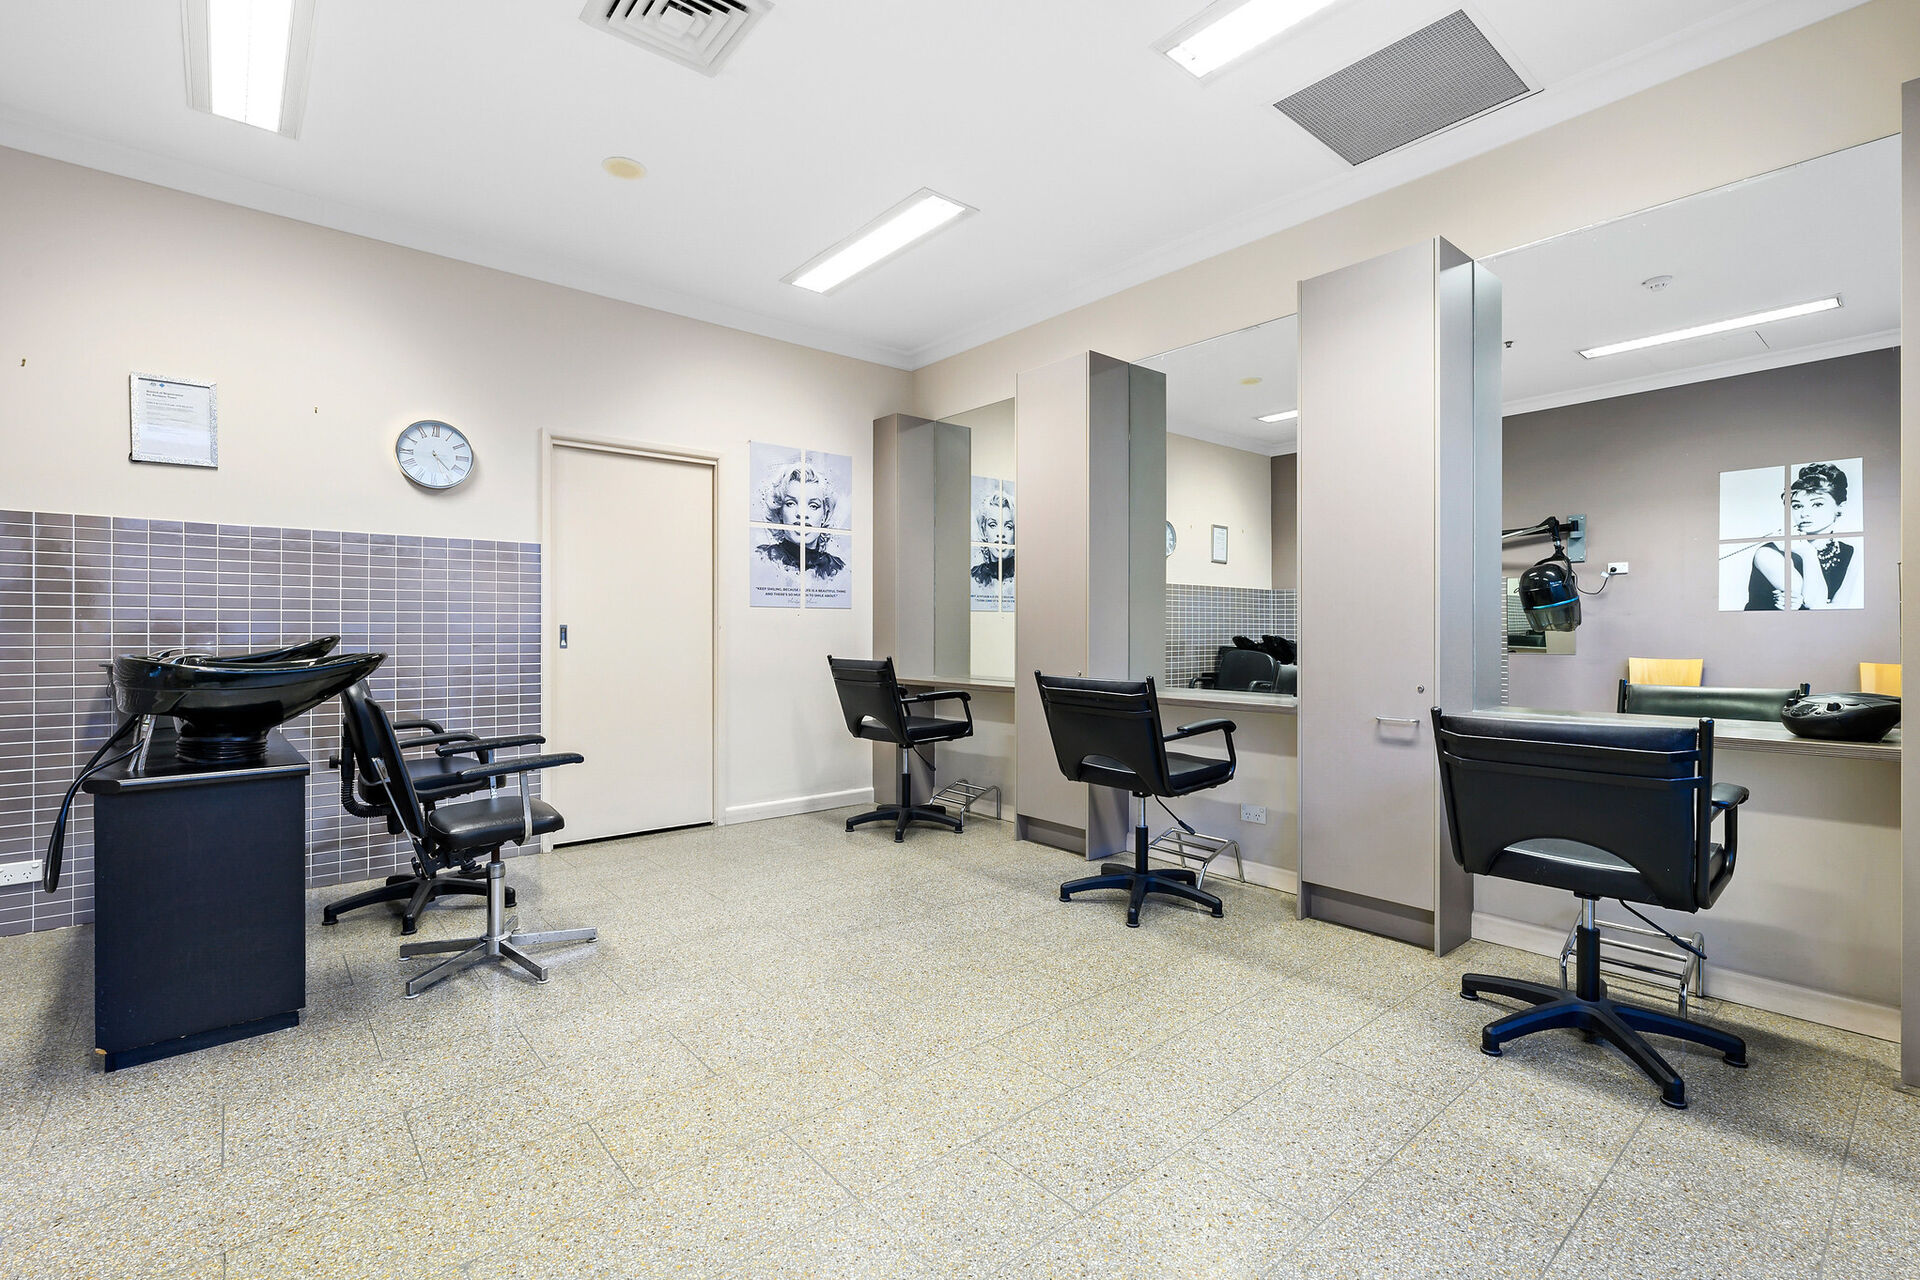 hairdresser for nursing home residents at baptistcare durham green centre aged care home in menangle nsw